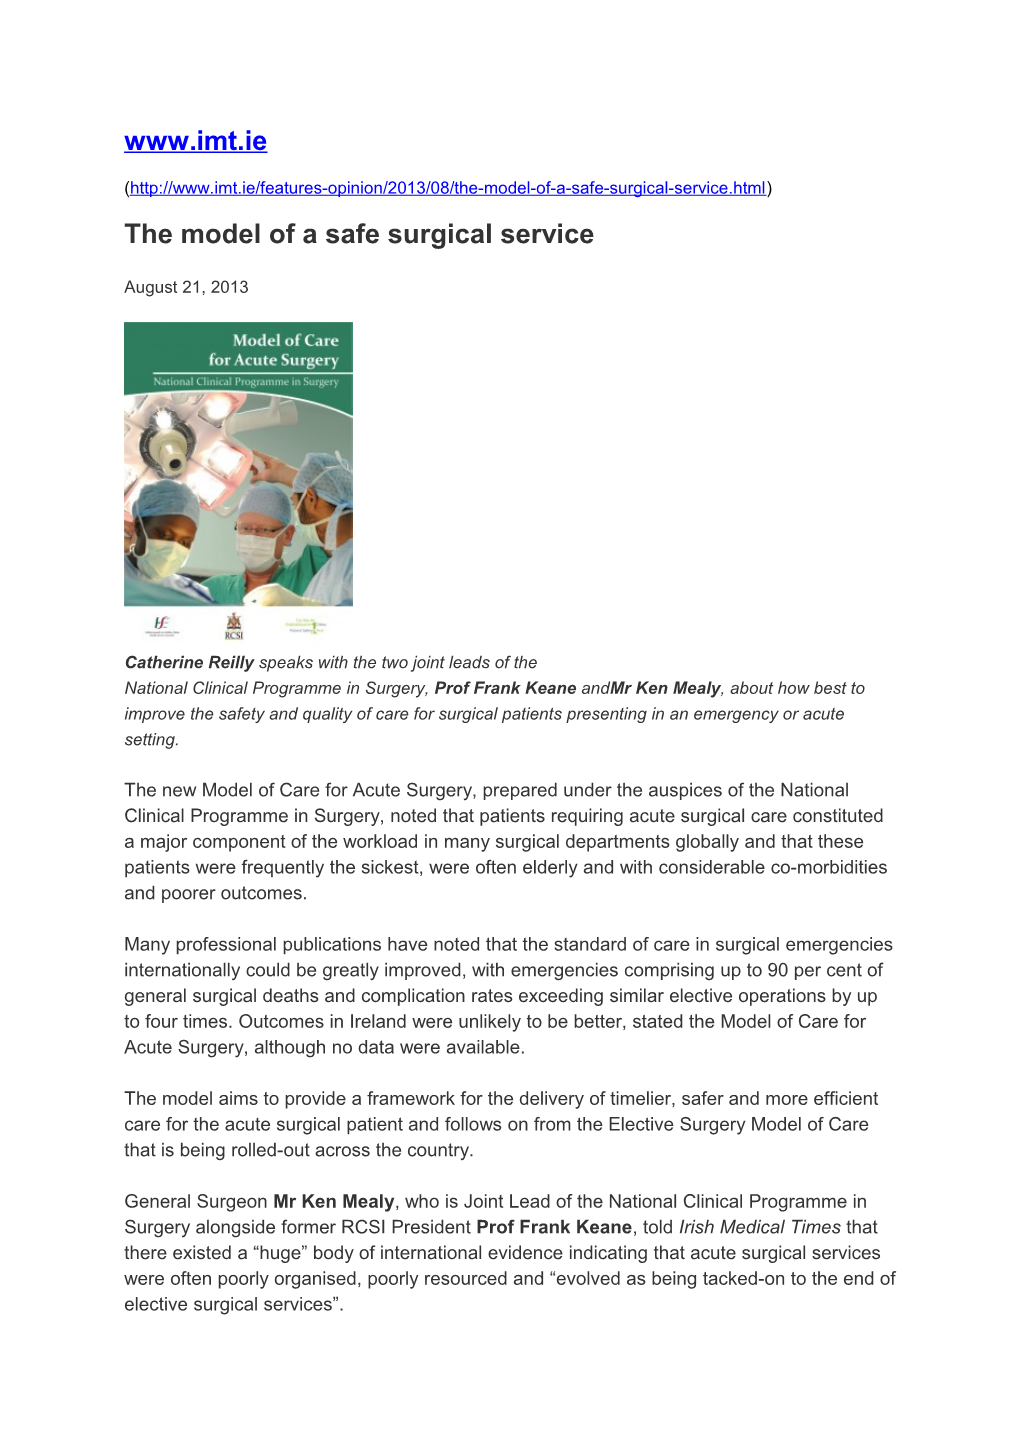 The Model of a Safe Surgical Service